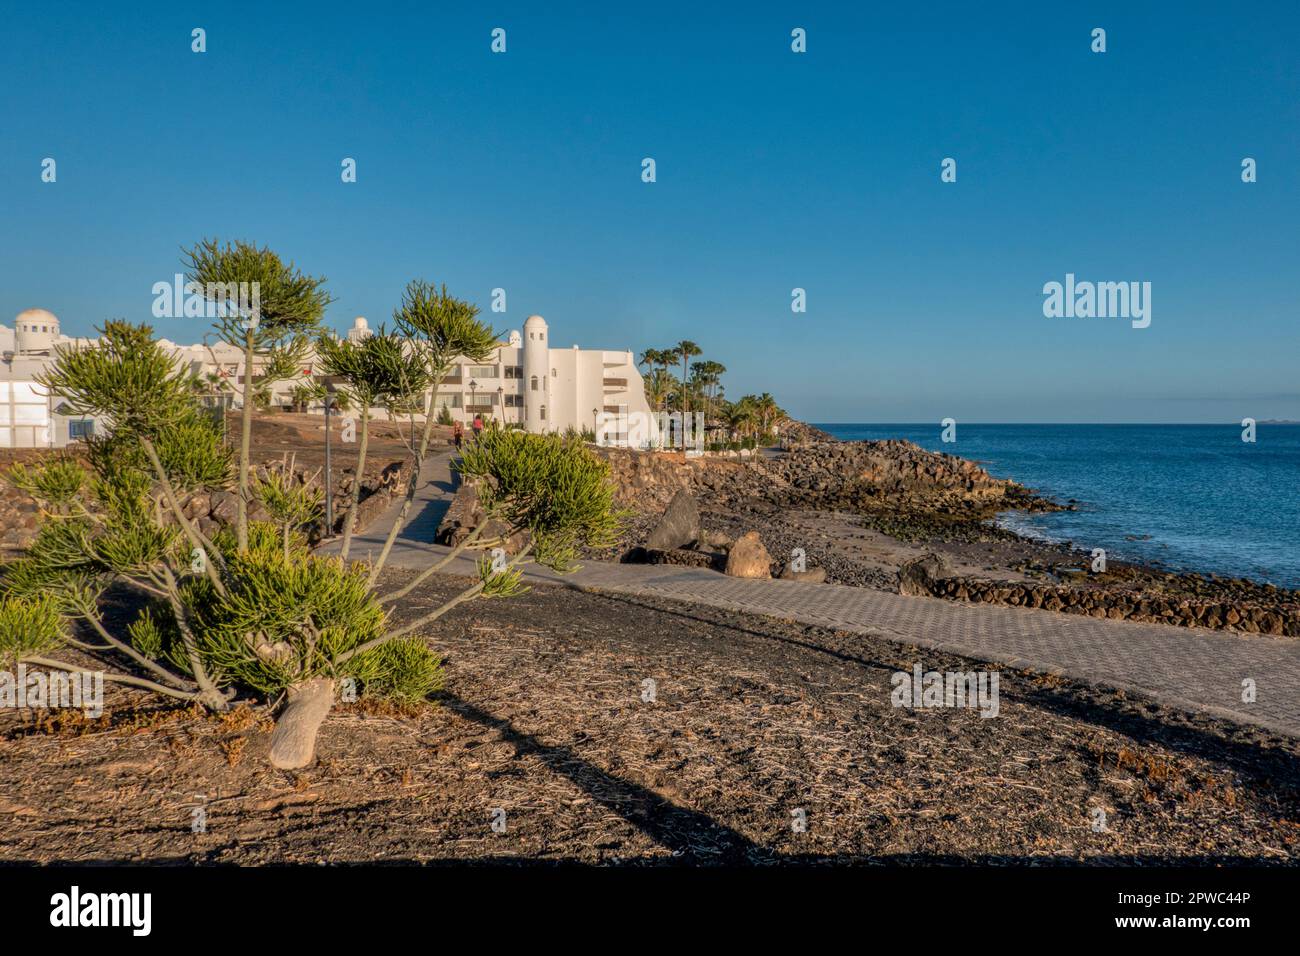 View of Playa Blanca (White Beach), located on the island of Lanzarote, Canary Islands, Spain Stock Photo